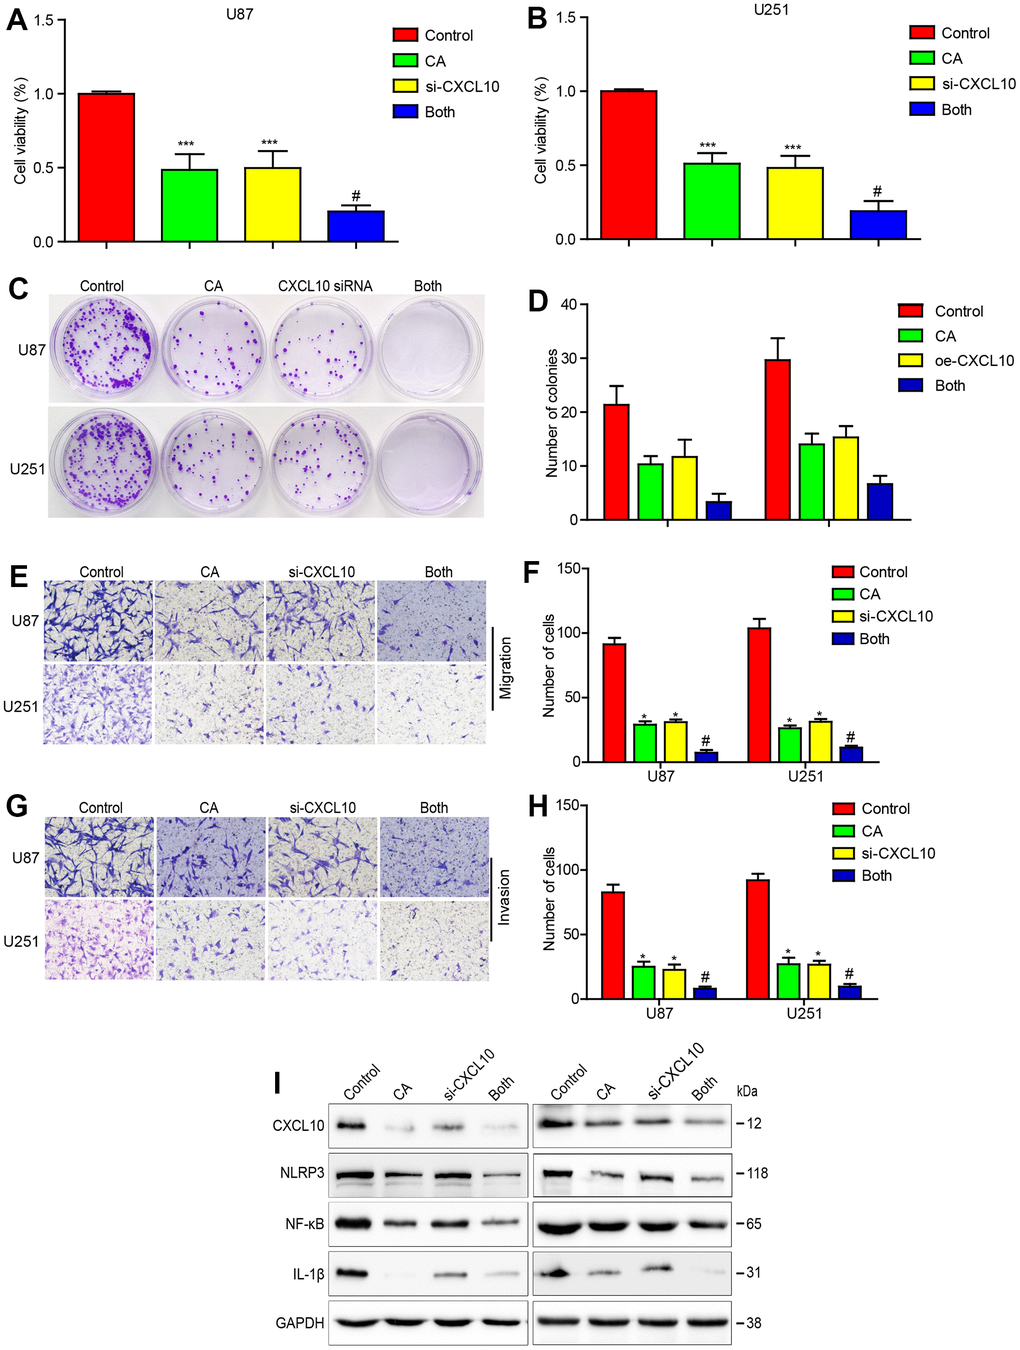 Downregulating CXCL10 enhances the effects of calycosin on cell proliferation, migration, invasion and CXCL10 signaling in GBM. (A–D) Effects of CXCL10 knockdown on calycosin in U87 and U251 cell proliferation. (E–H) Effects of downregulating CXCL10 on calycosin in U87 and U251 cell migration and invasion. (I) Downregulating CXCL10 promotes calycosin-induced CXCL10, NLRP3, NF-κB and IL-1β downregulation. Control: siRNA negative control transfection; CA: siRNA negative control transfection + 200μM calycosin; CXCL10: CXCL10 siRNA transfection; both: CXCL10 siRNA transfection + 200μM calycosin. *P #P 